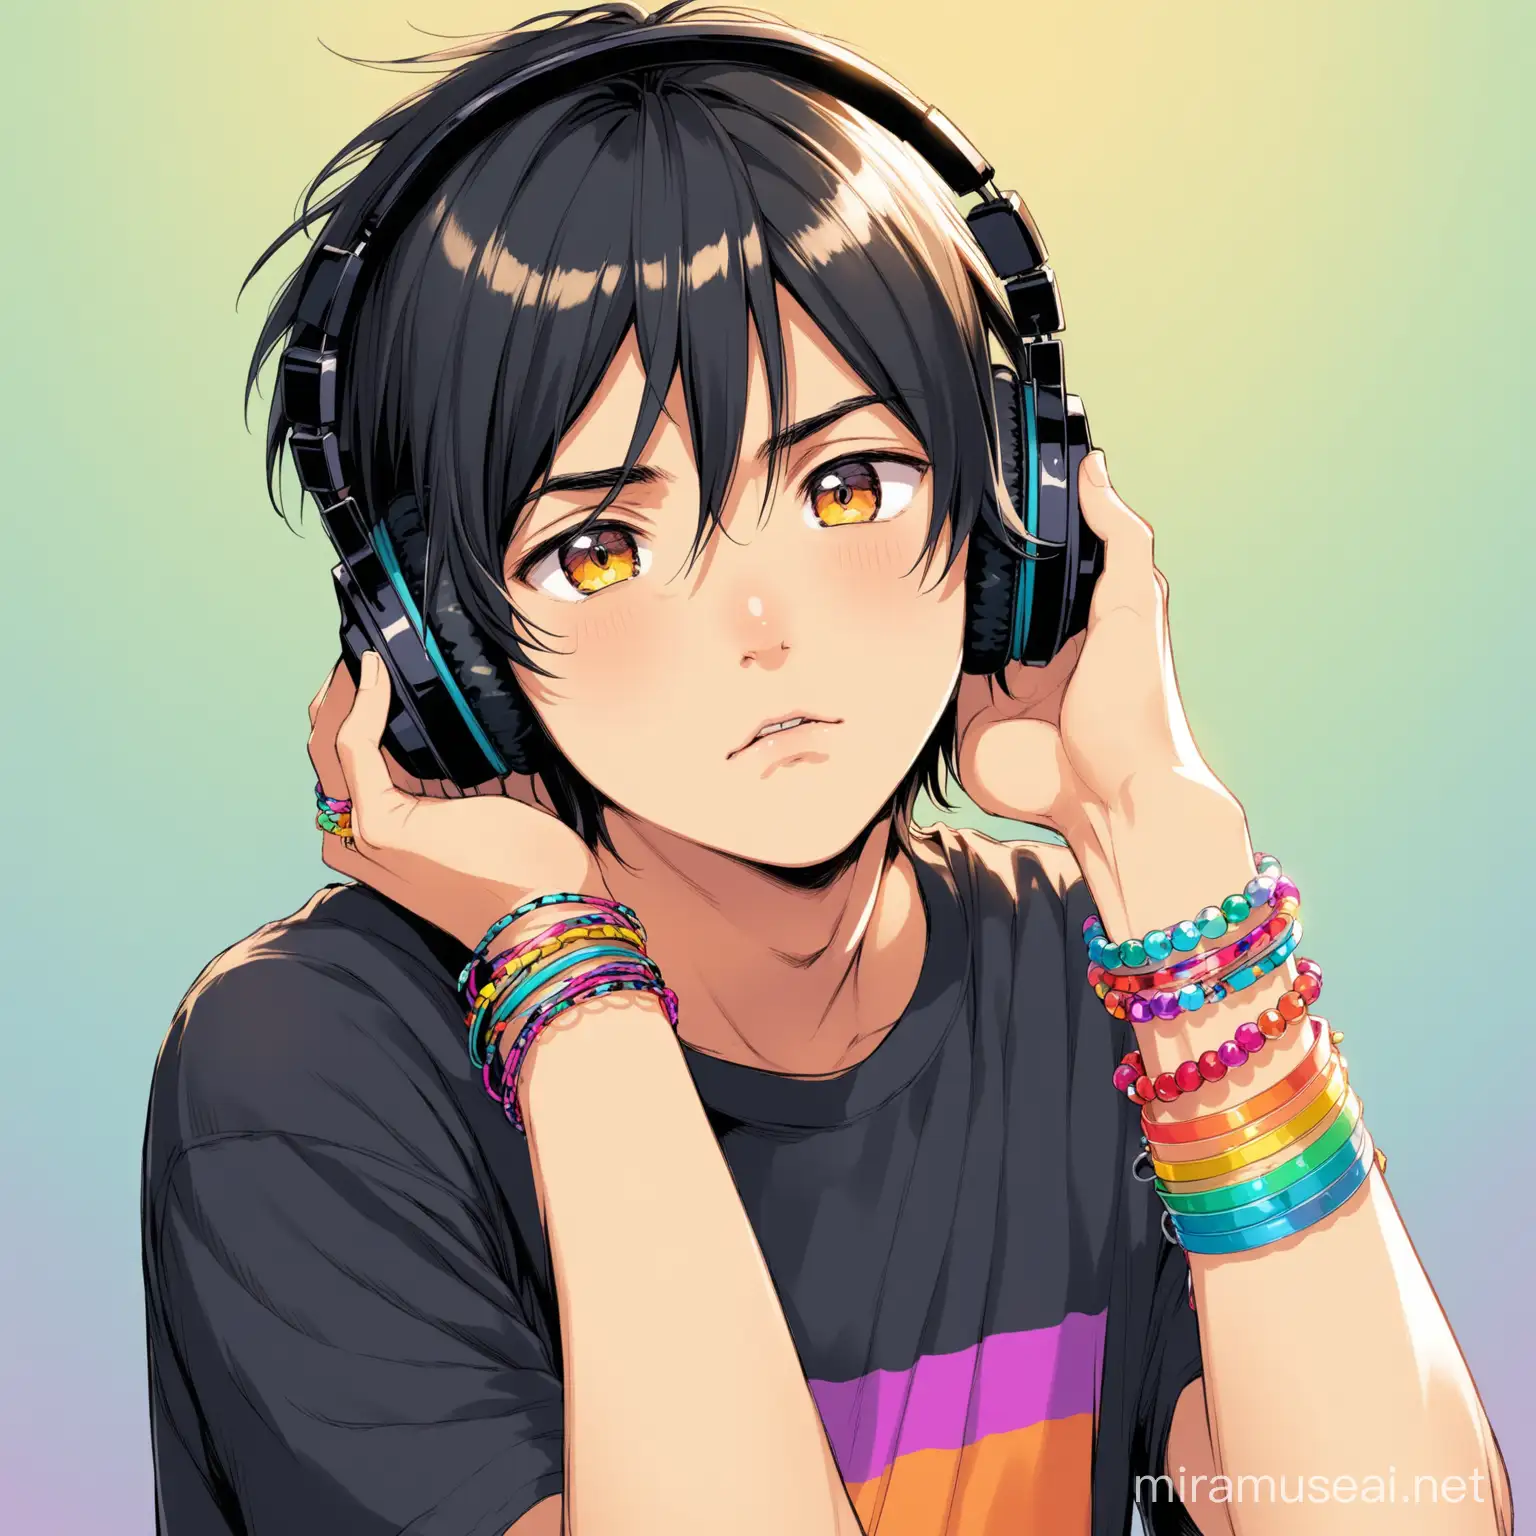 Teenage Boy with ADHD Feeling Excluded Wearing Colorful Tshirt and Headphones